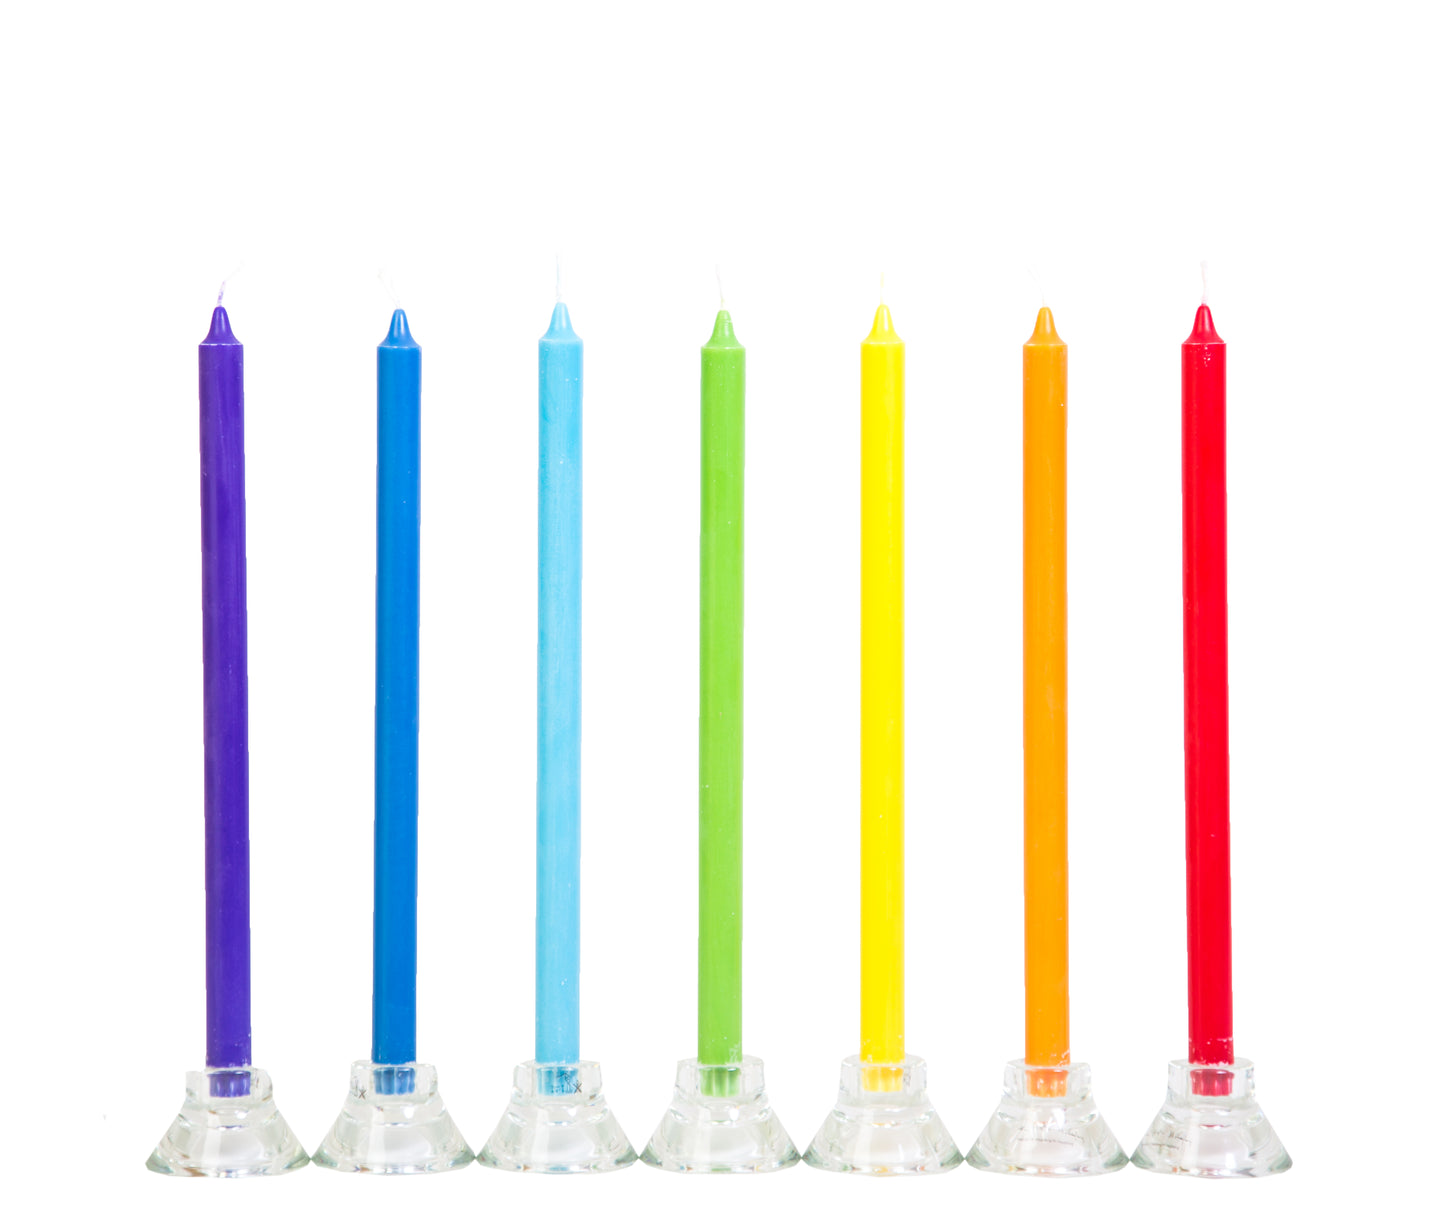 Chakra Long Table Candle "The Third Eye"